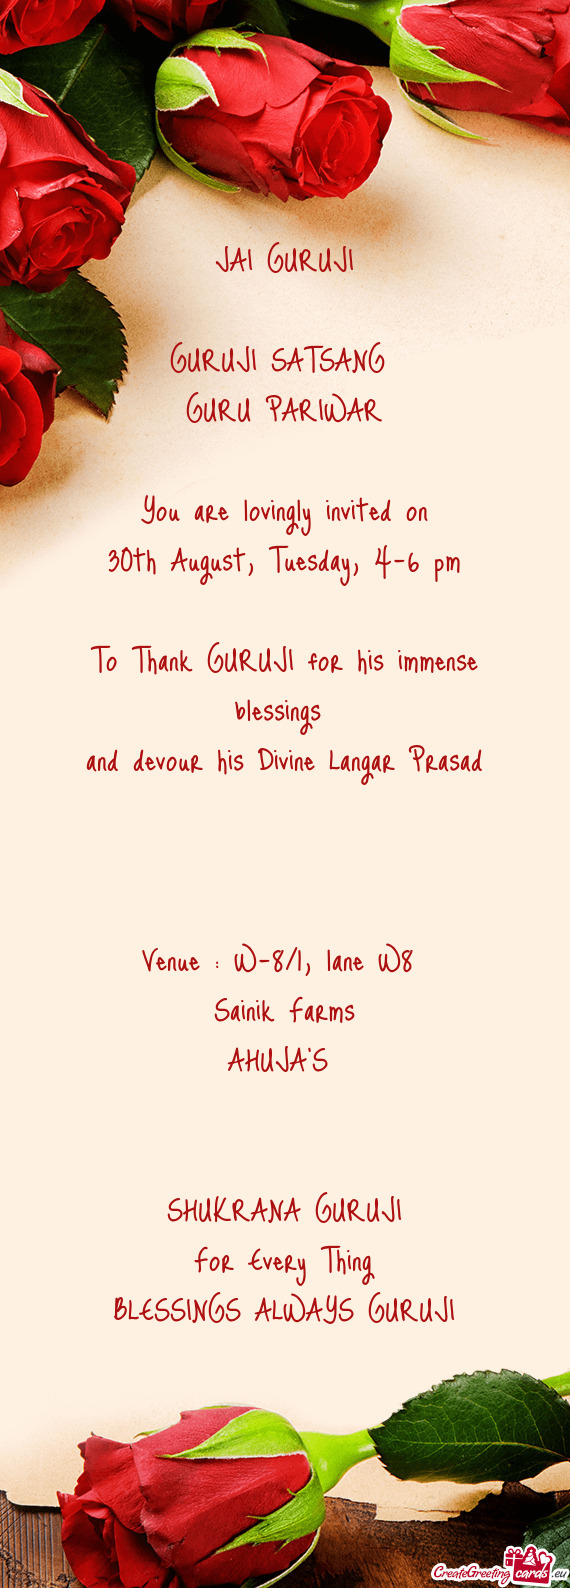 30th August, Tuesday, 4-6 pm